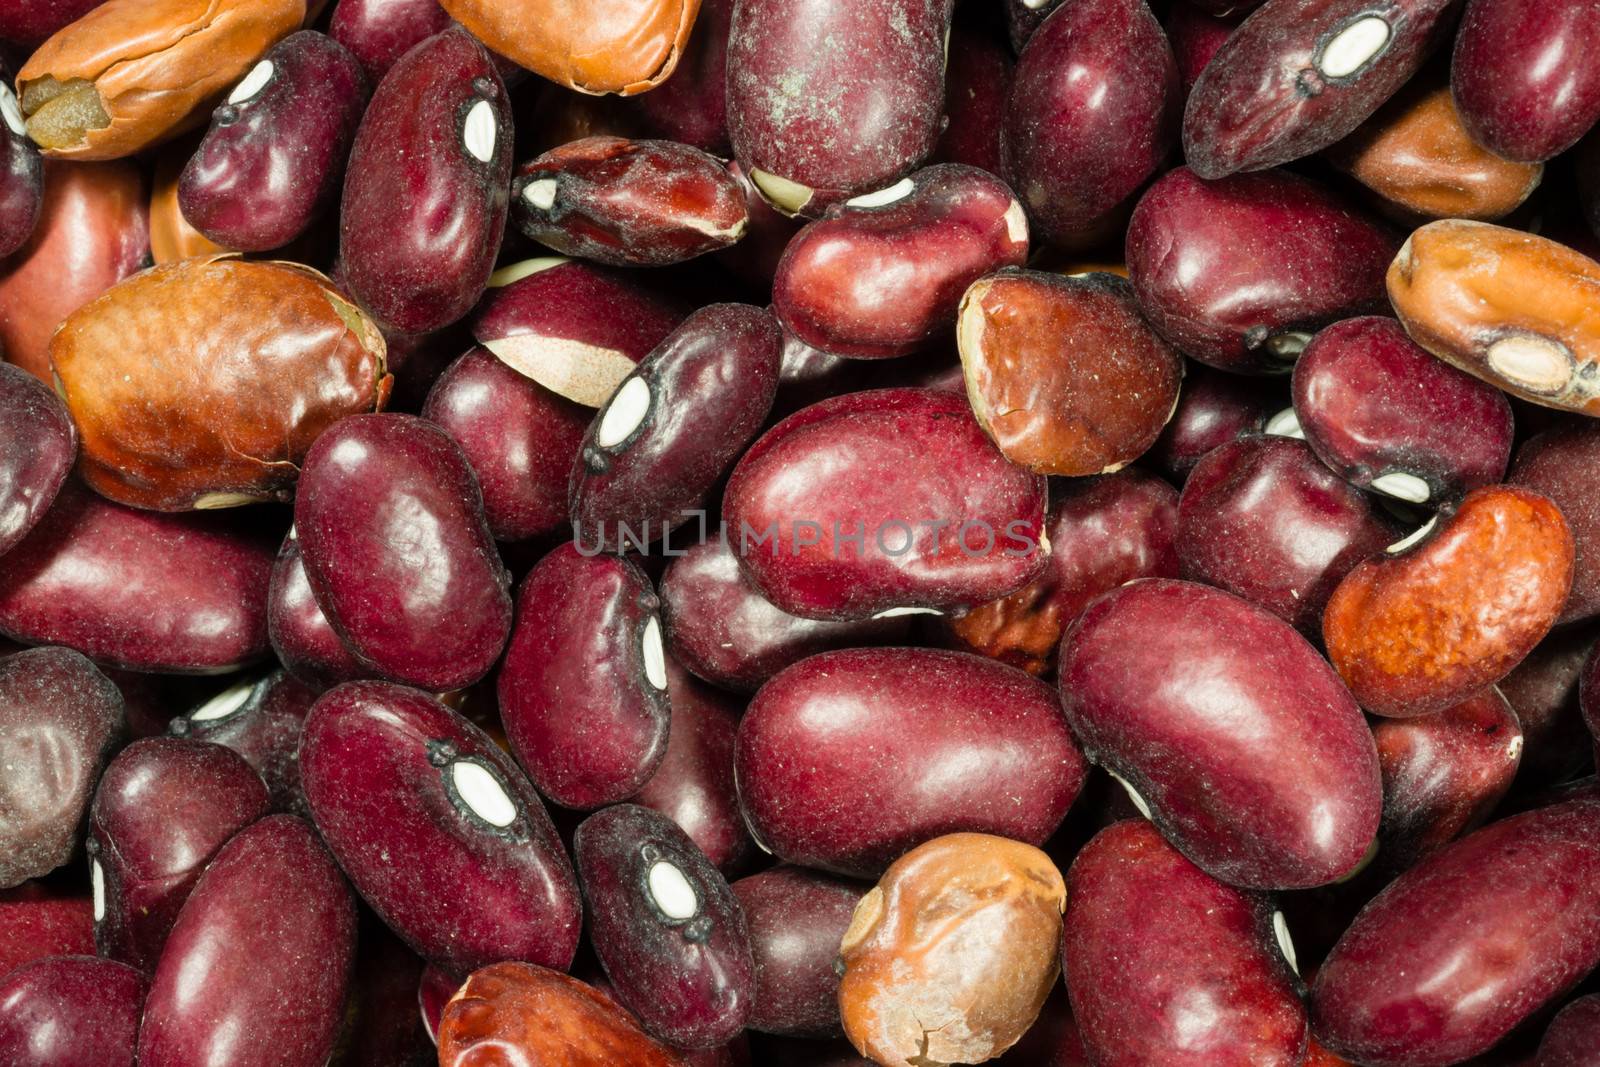 Pile of Dried Kidney Beans Dry Unrinsed Healthy Food Staple by ChrisBoswell